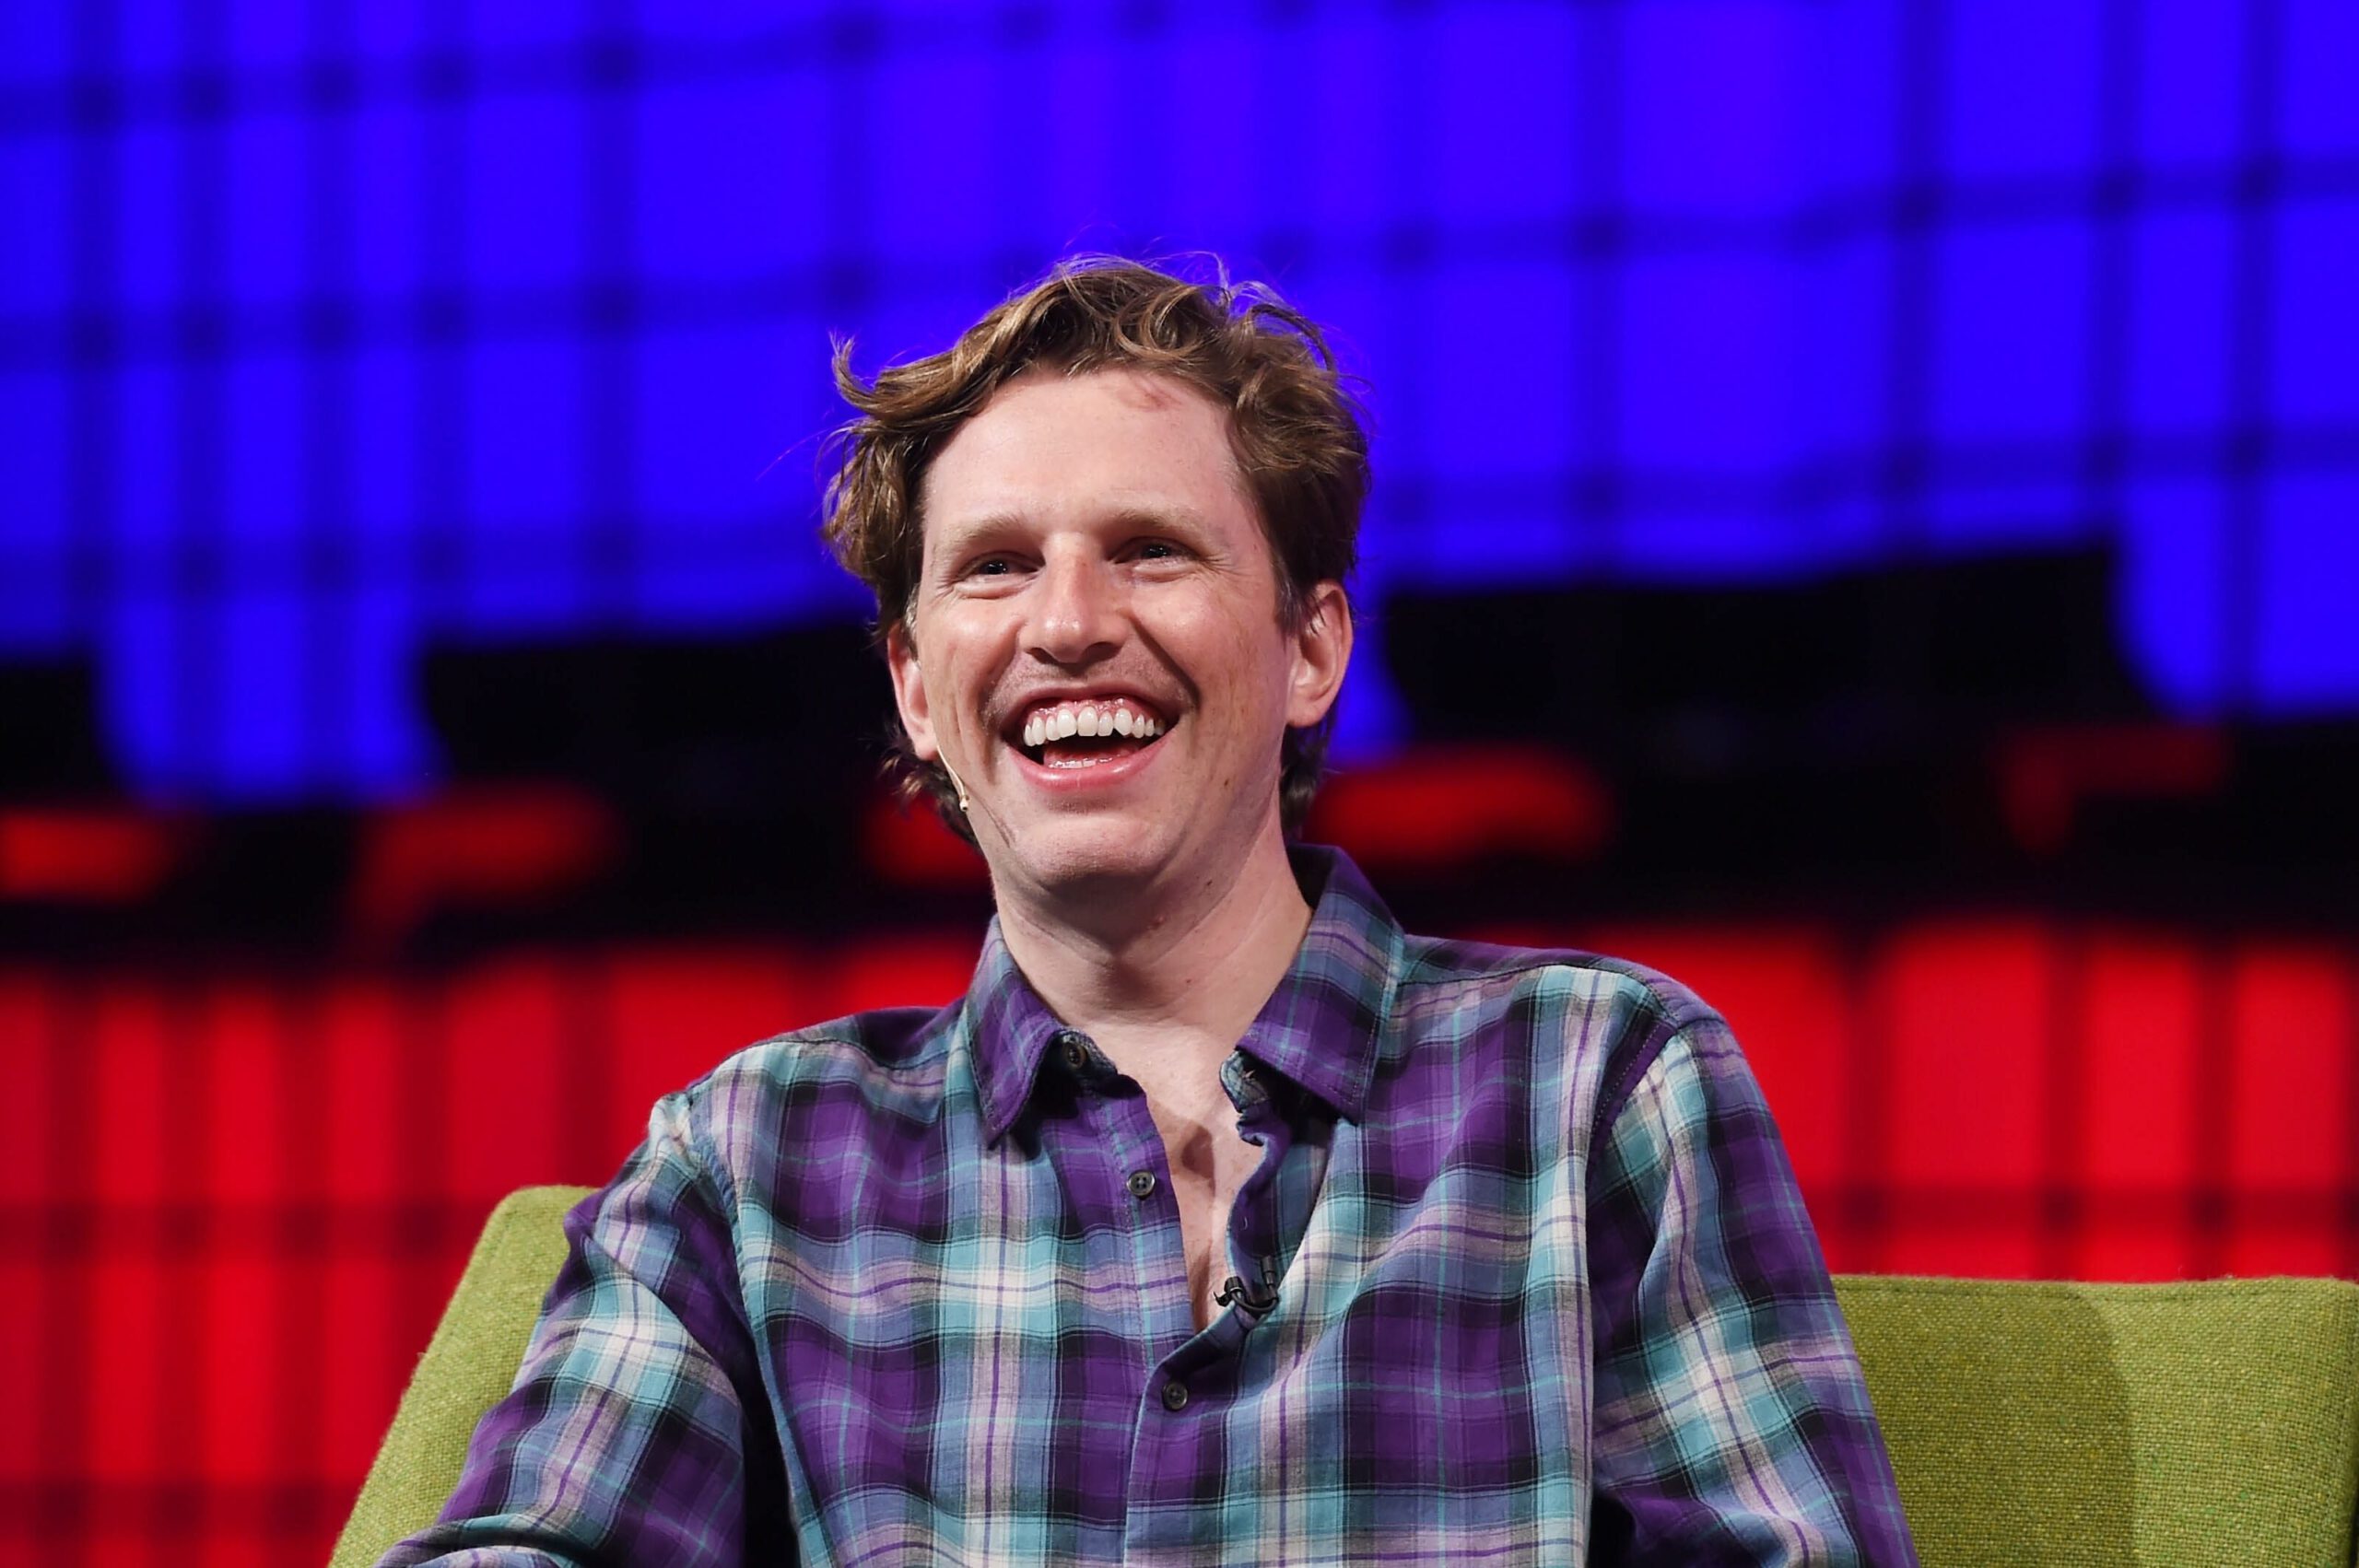 Matt Mullenweg is a white man with wavy blonde hair. He is wearing a plaid shirt and smiling on a lime green couch.